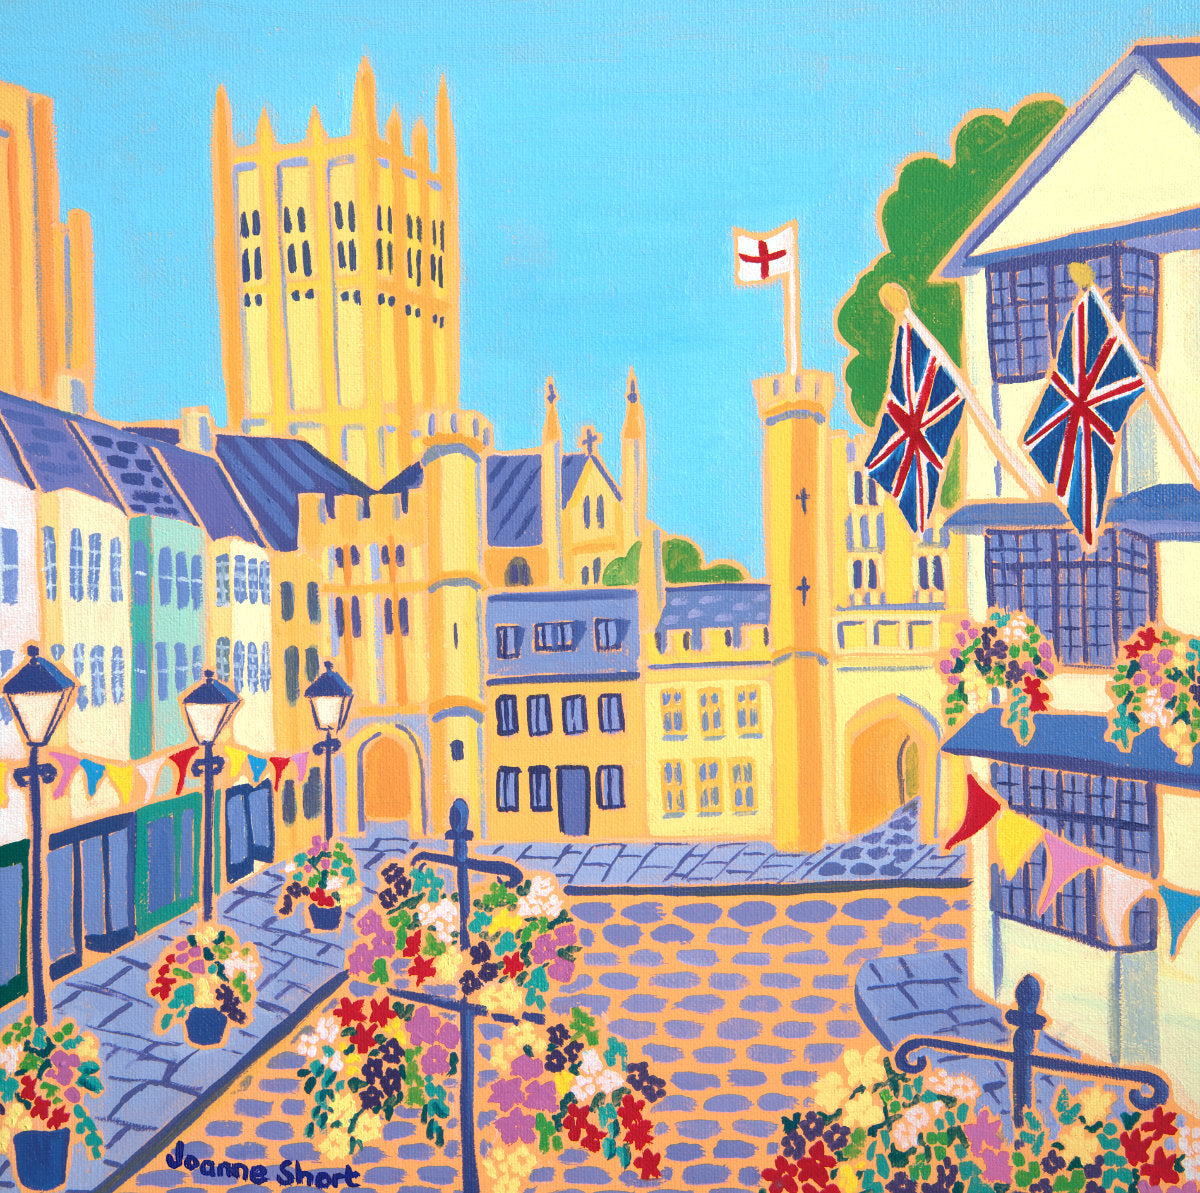 &#39;Hanging Baskets, Bunting and Flags, Market Square, Wells&#39;. 12 x 12 inches original art oil on canvas. Paintings of Somerset by Cornish Artist Joanne Short from our Cornwall Art Gallery